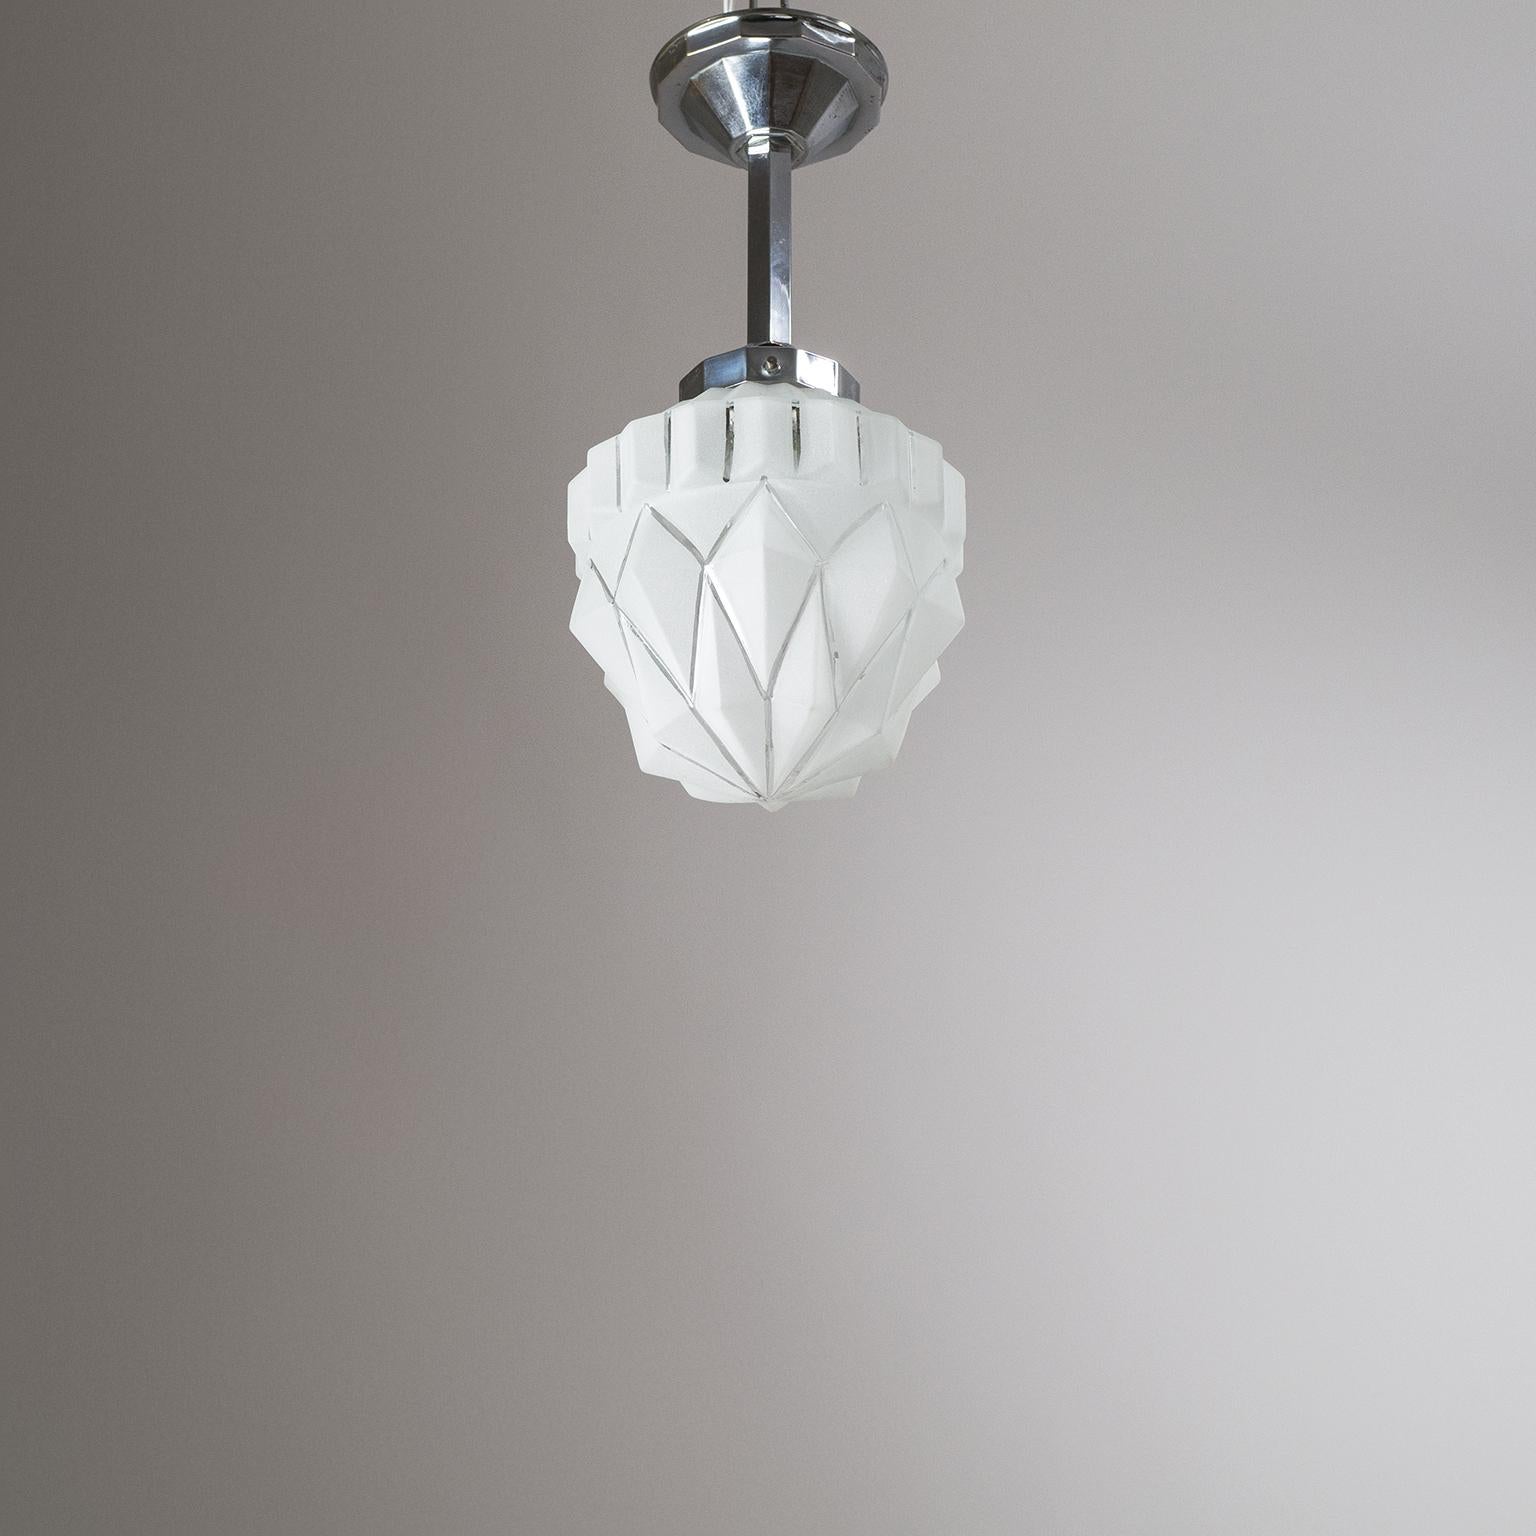 1920s French Art Deco Ceiling Light, Chrome and Frosted Glass 9